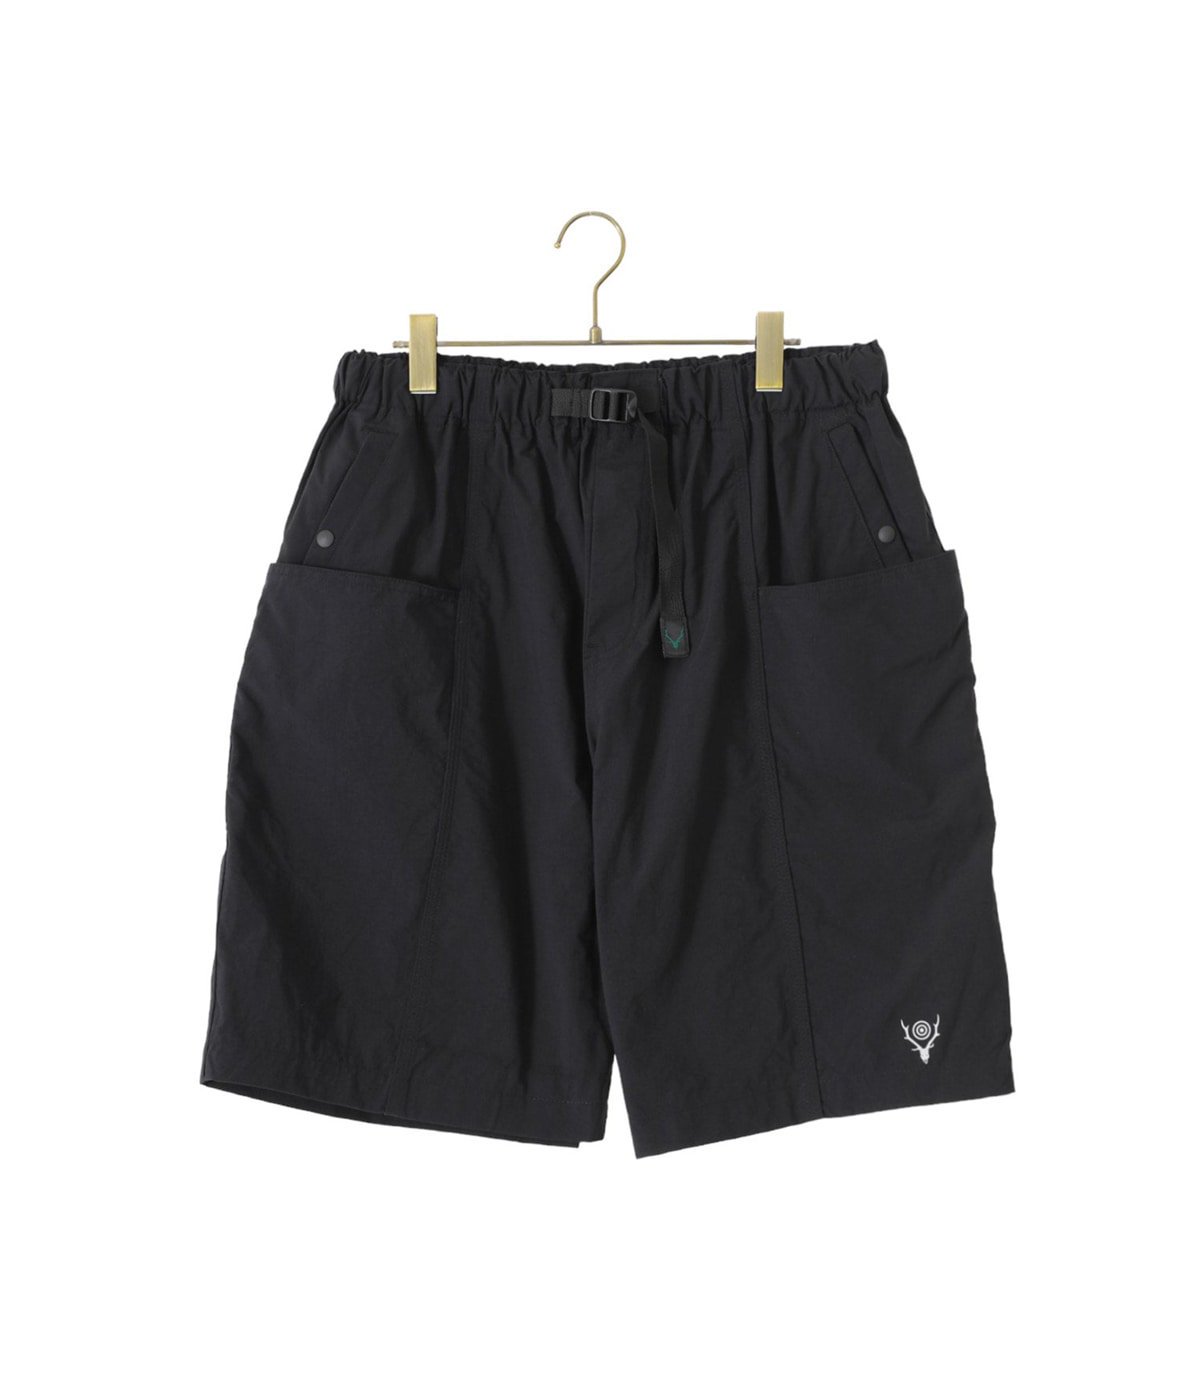 south2west8 Belted C.S. Short パンツ